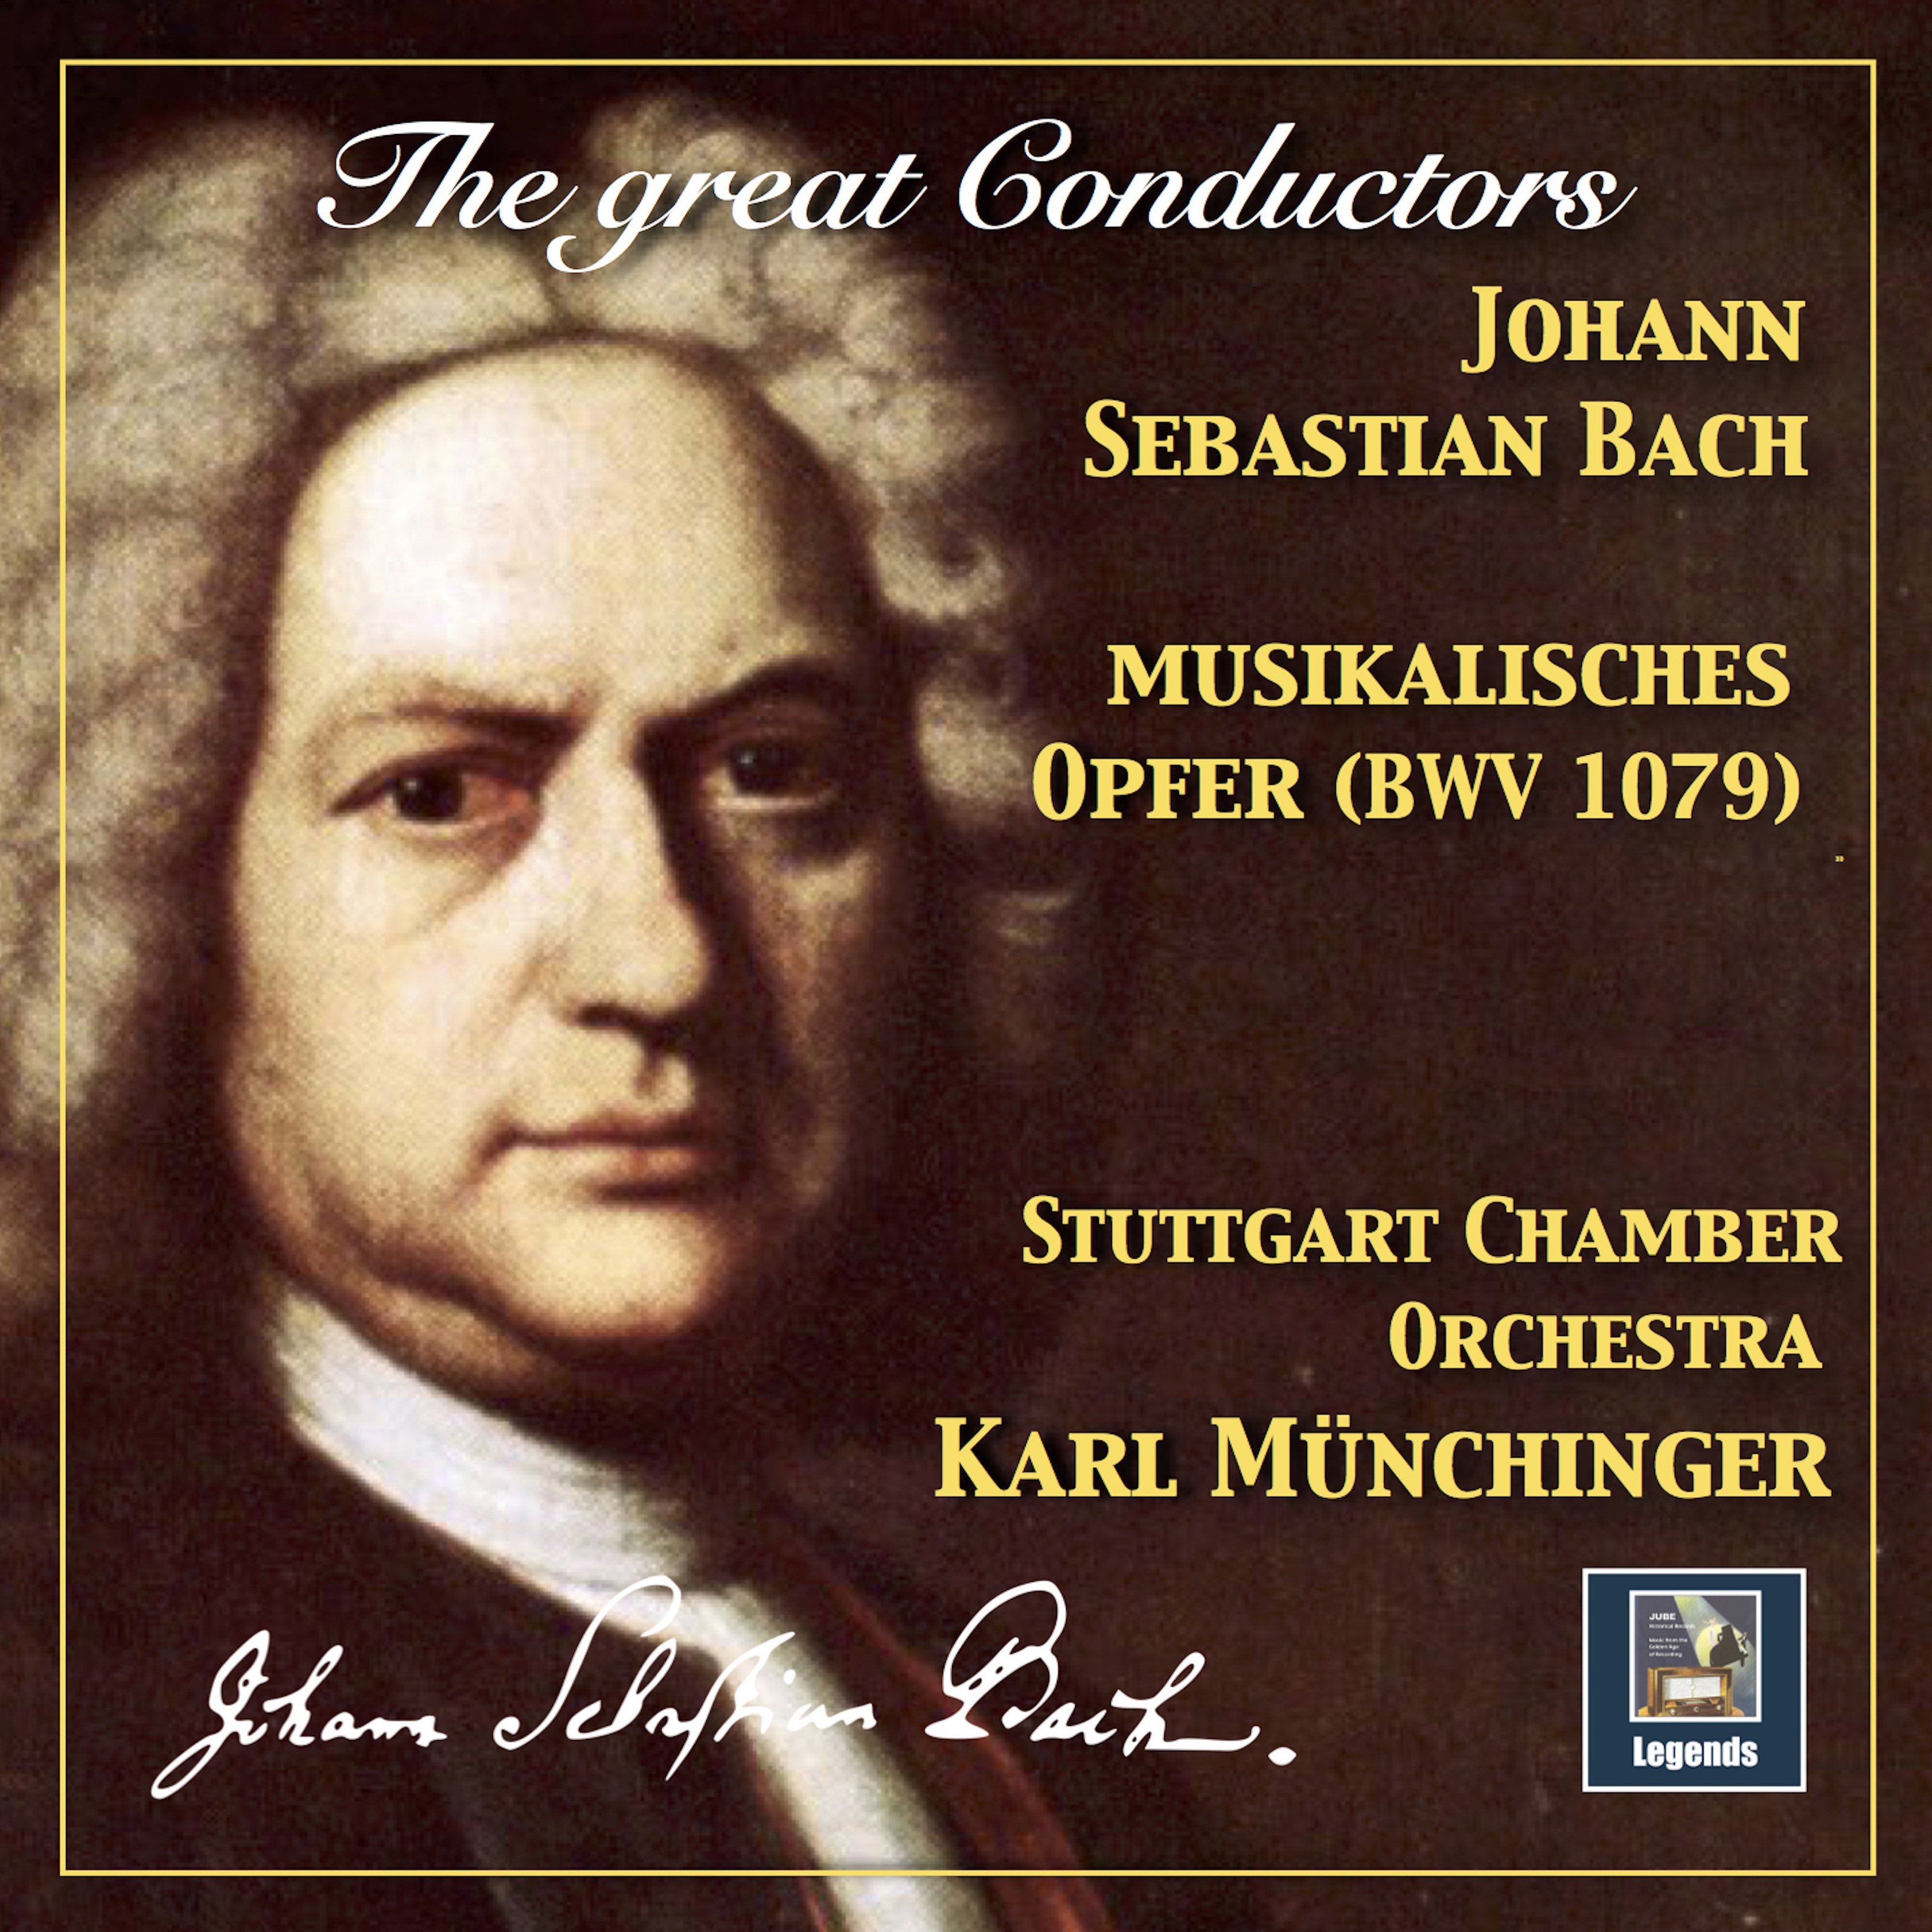 Musikalisches Opfer, BWV 1079 Arr. K. Mü nchinger for Chamber Orchestra: Sonata a 3, Andante